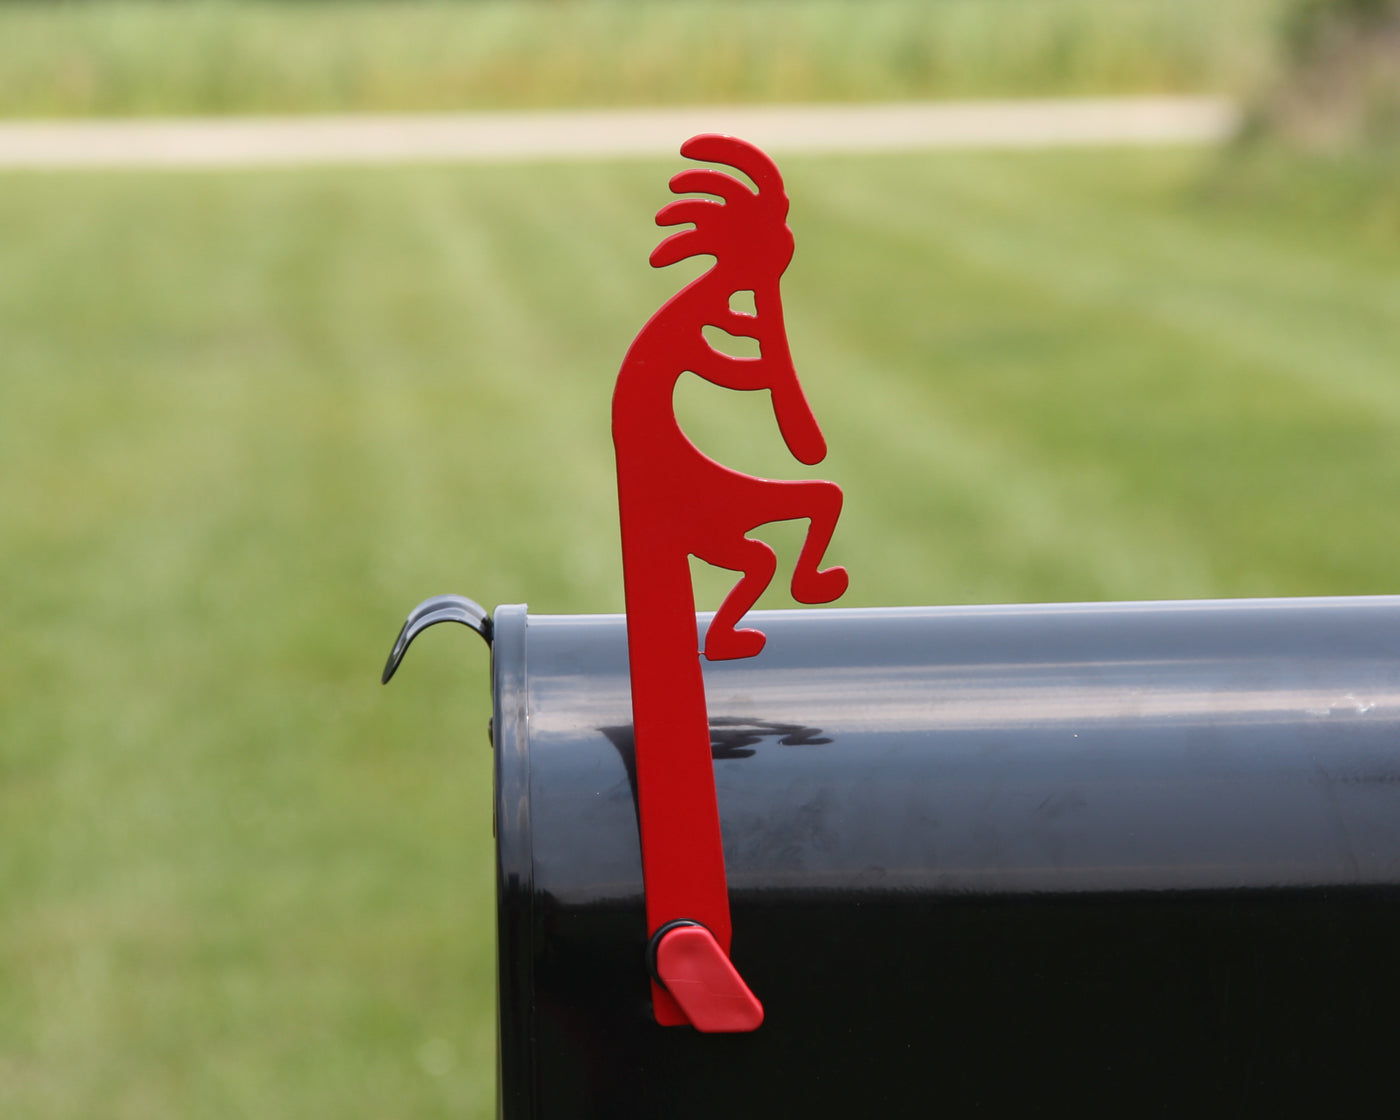 Kokopelli Mailbox Flag - Madison Iron and Wood - Mailbox Post Decor - metal outdoor decor - Steel deocrations - american made products - veteran owned business products - fencing decorations - fencing supplies - custom wall decorations - personalized wall signs - steel - decorative post caps - steel post caps - metal post caps - brackets - structural brackets - home improvement - easter - easter decorations - easter gift - easter yard decor